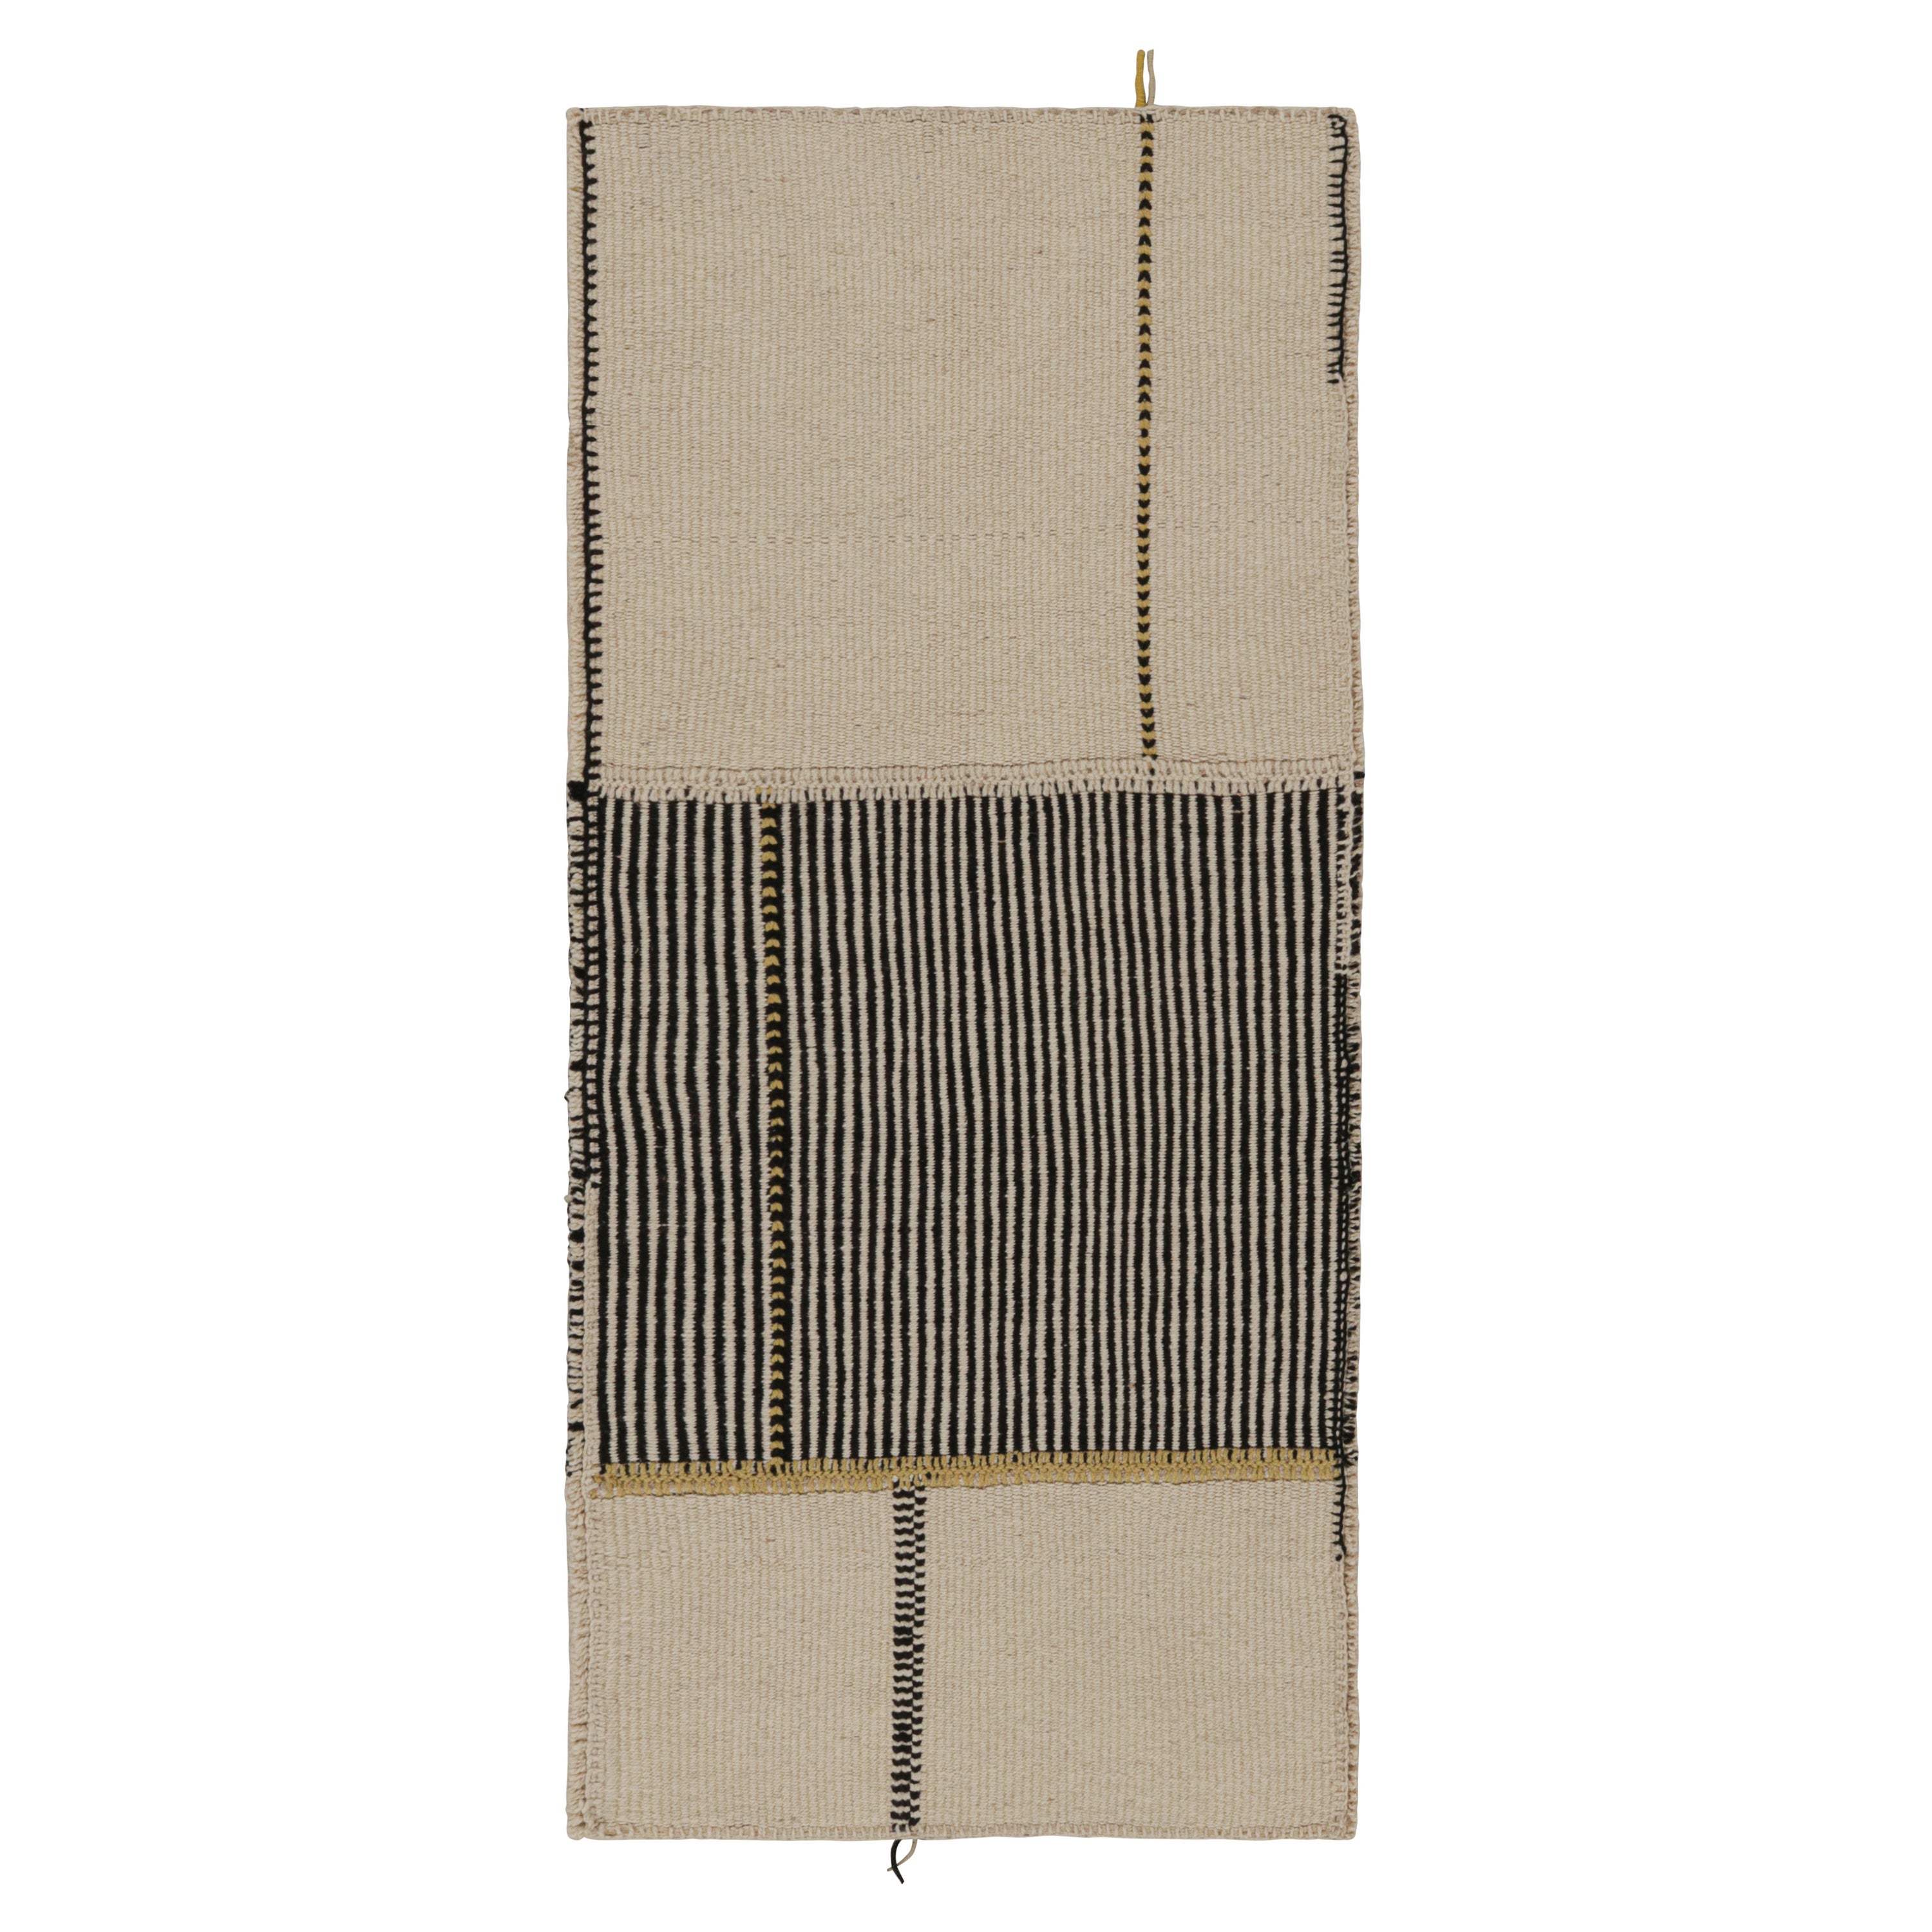 Rug & Kilim’s Contemporary Runner Kilim, In Black And Beige Tones and Stripes For Sale